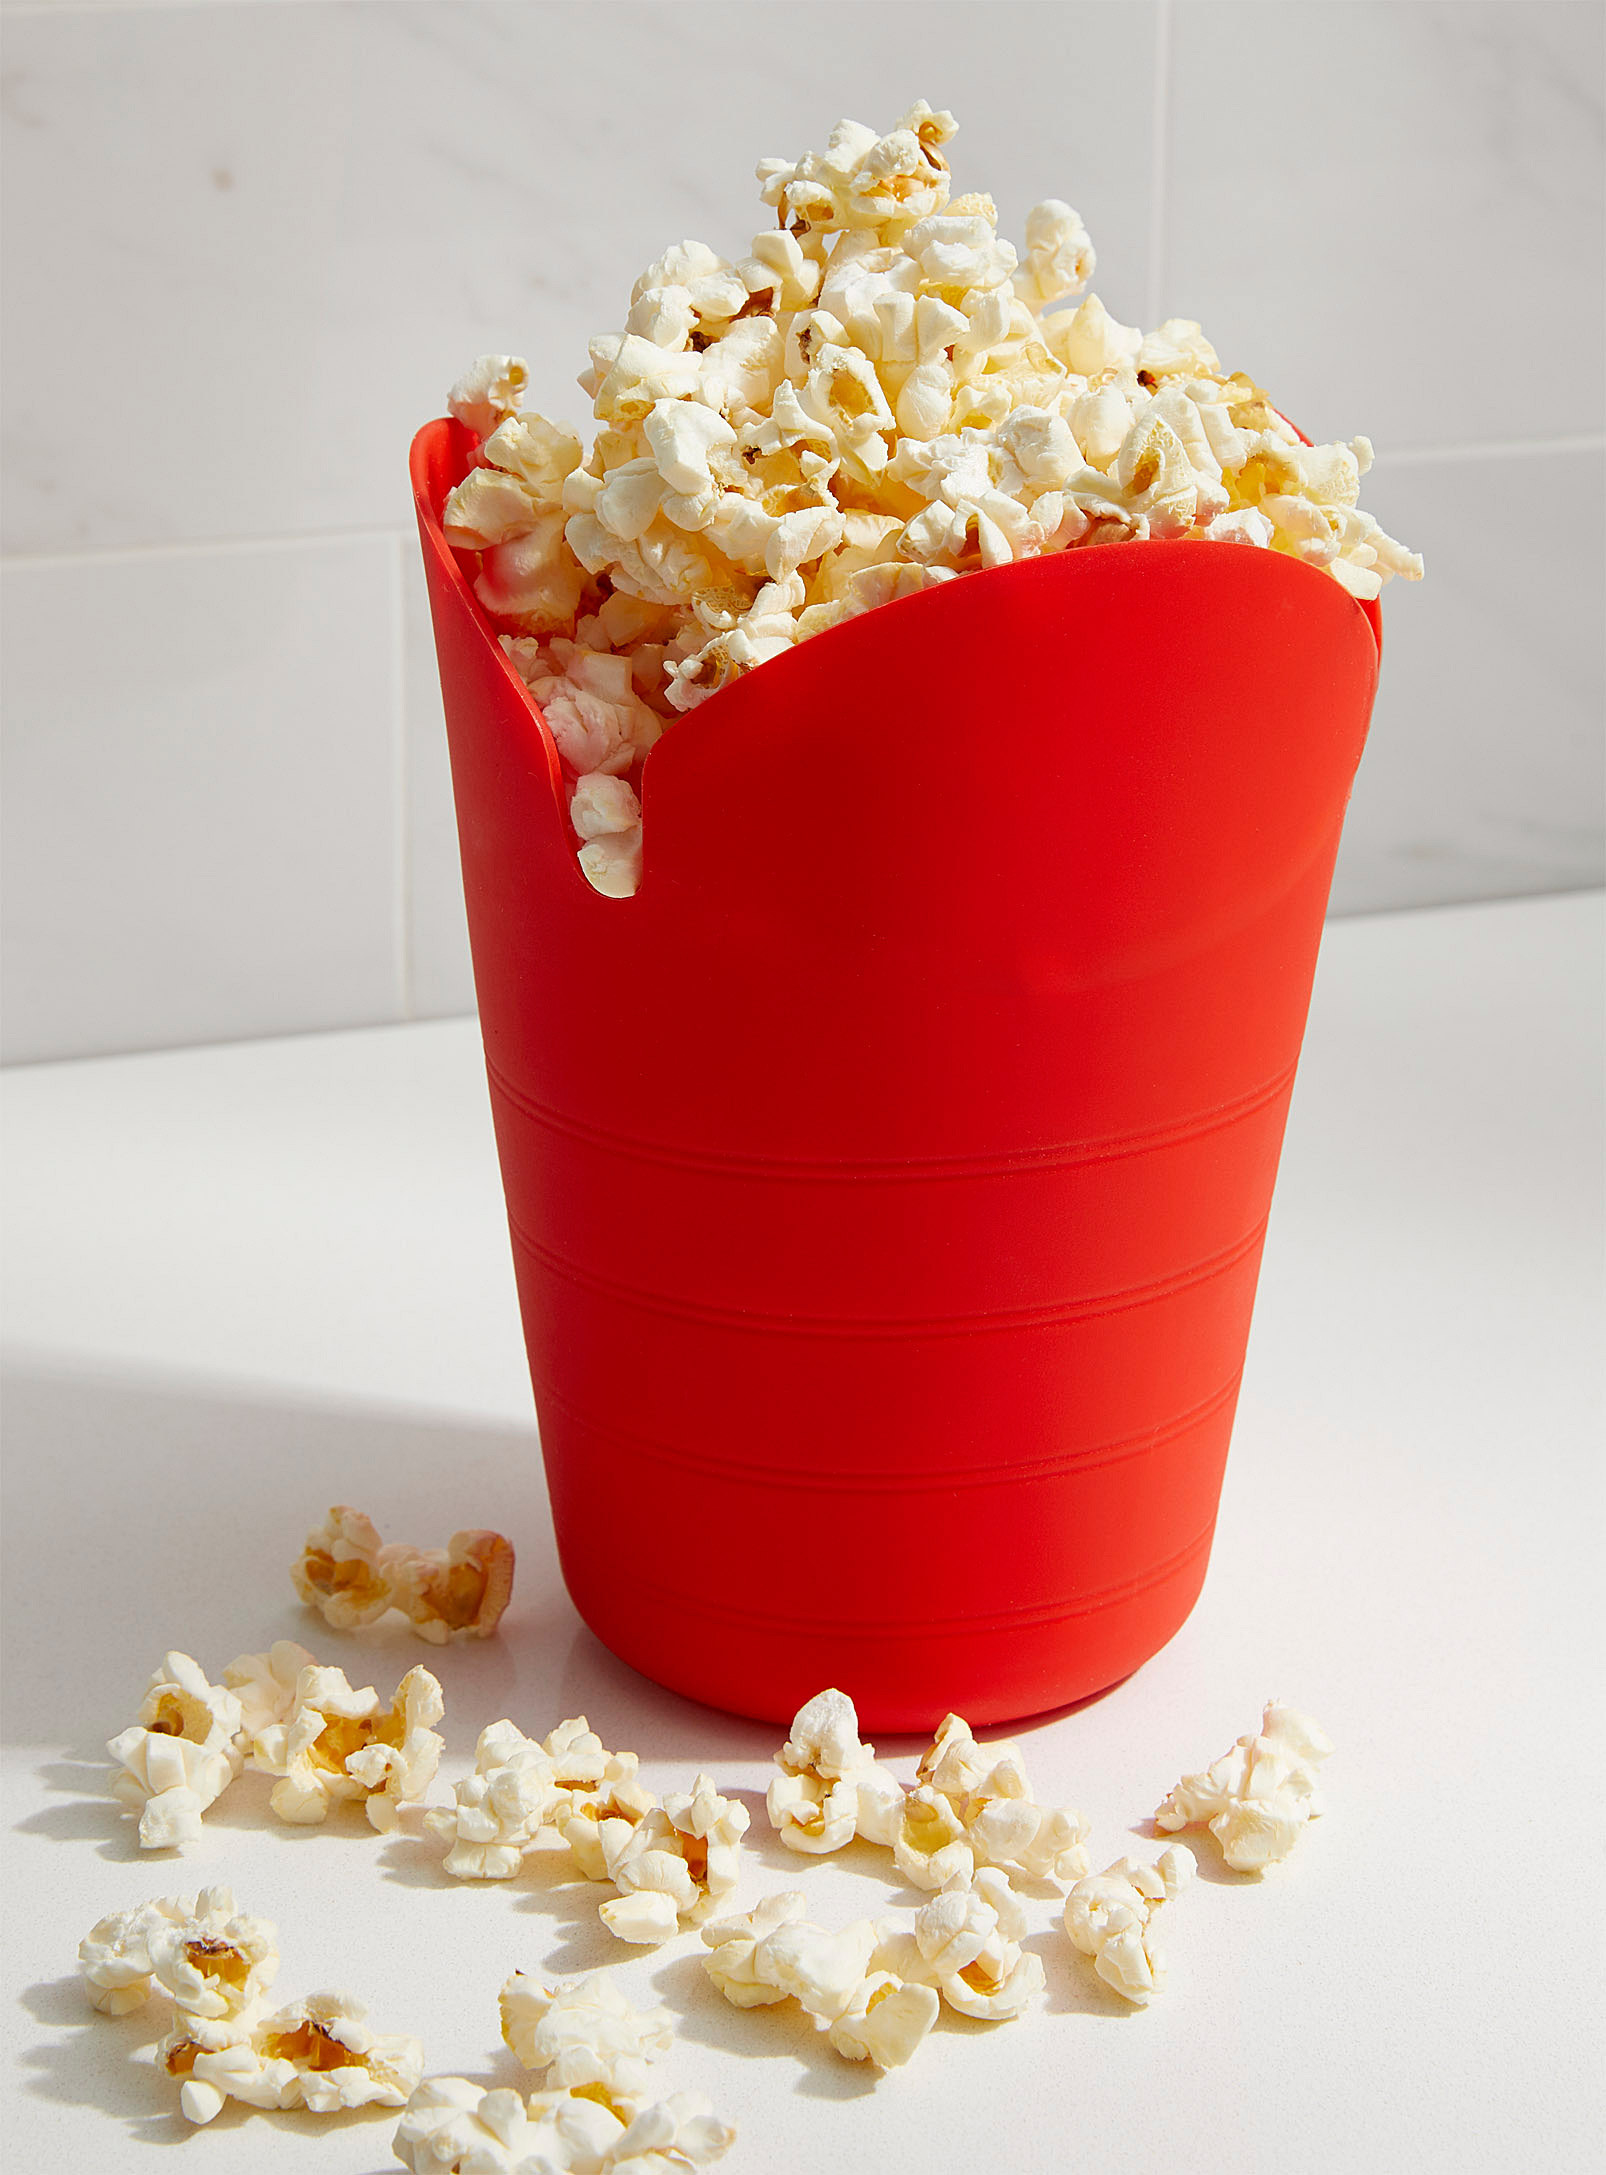 A large cup that is overflowing with popcorn